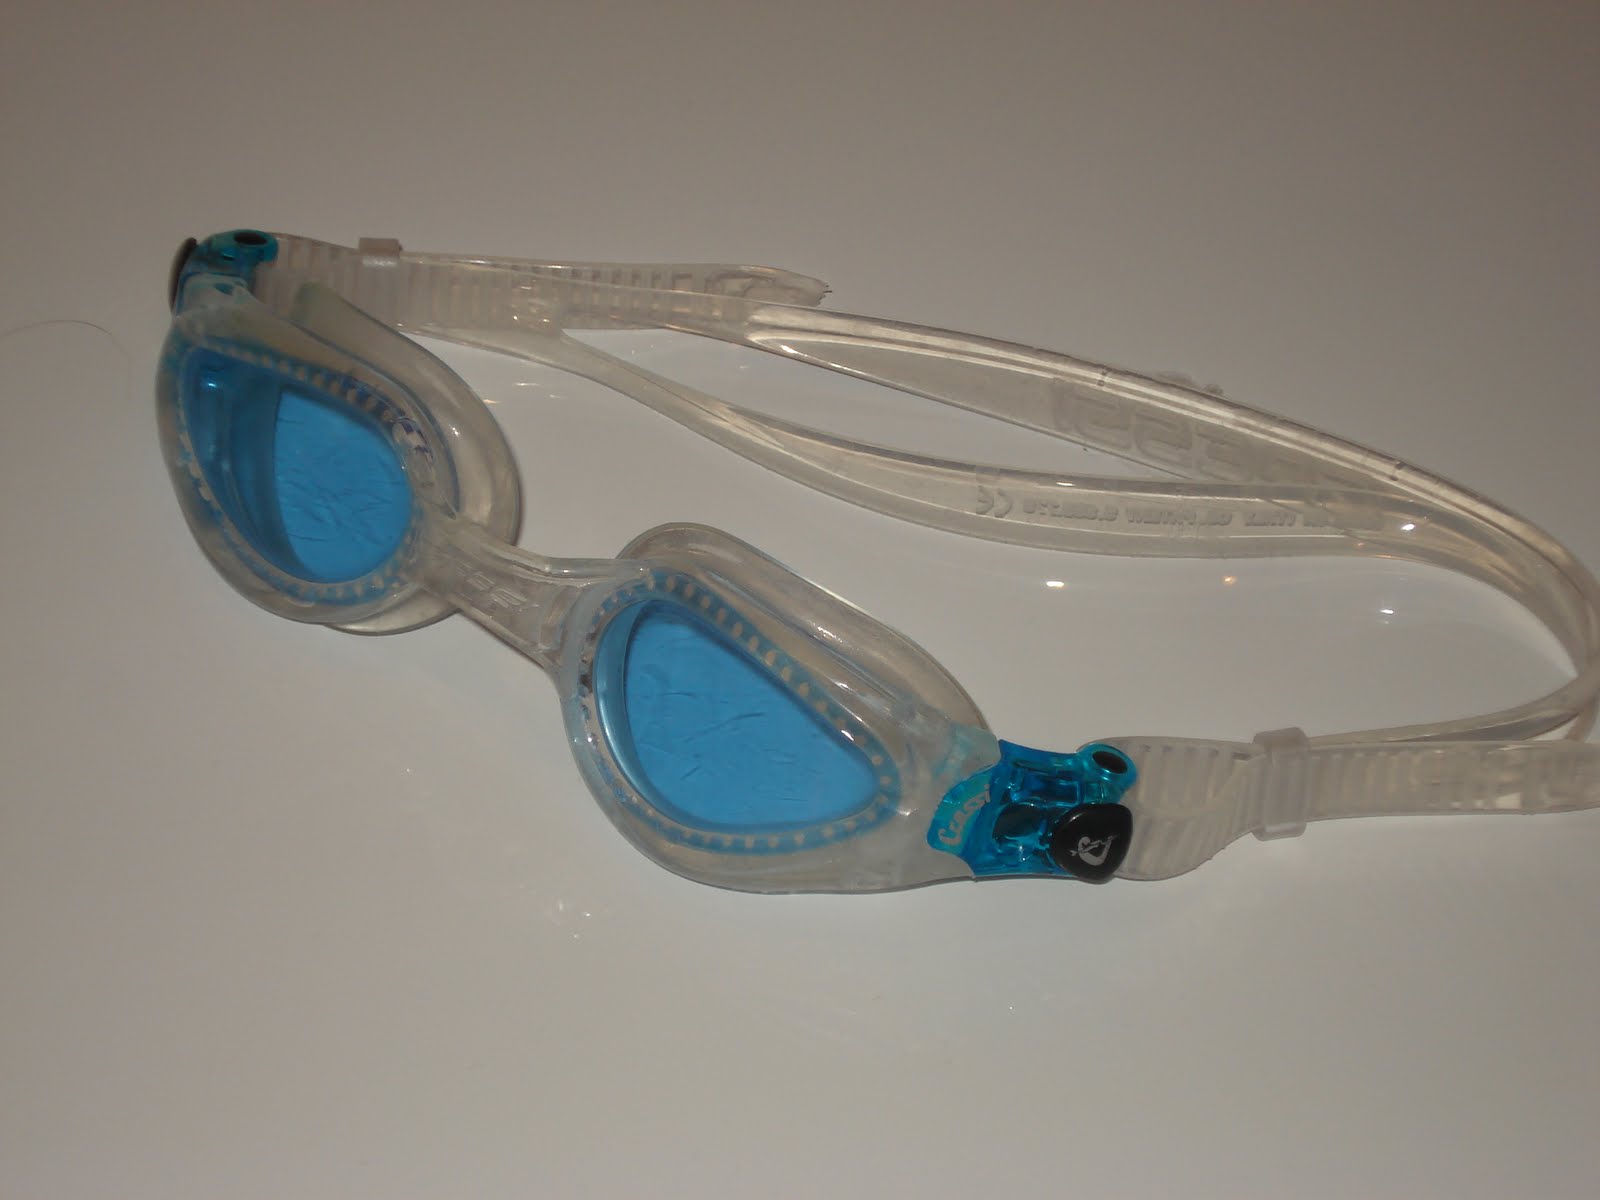 SWIMMING WAVES: Goggles